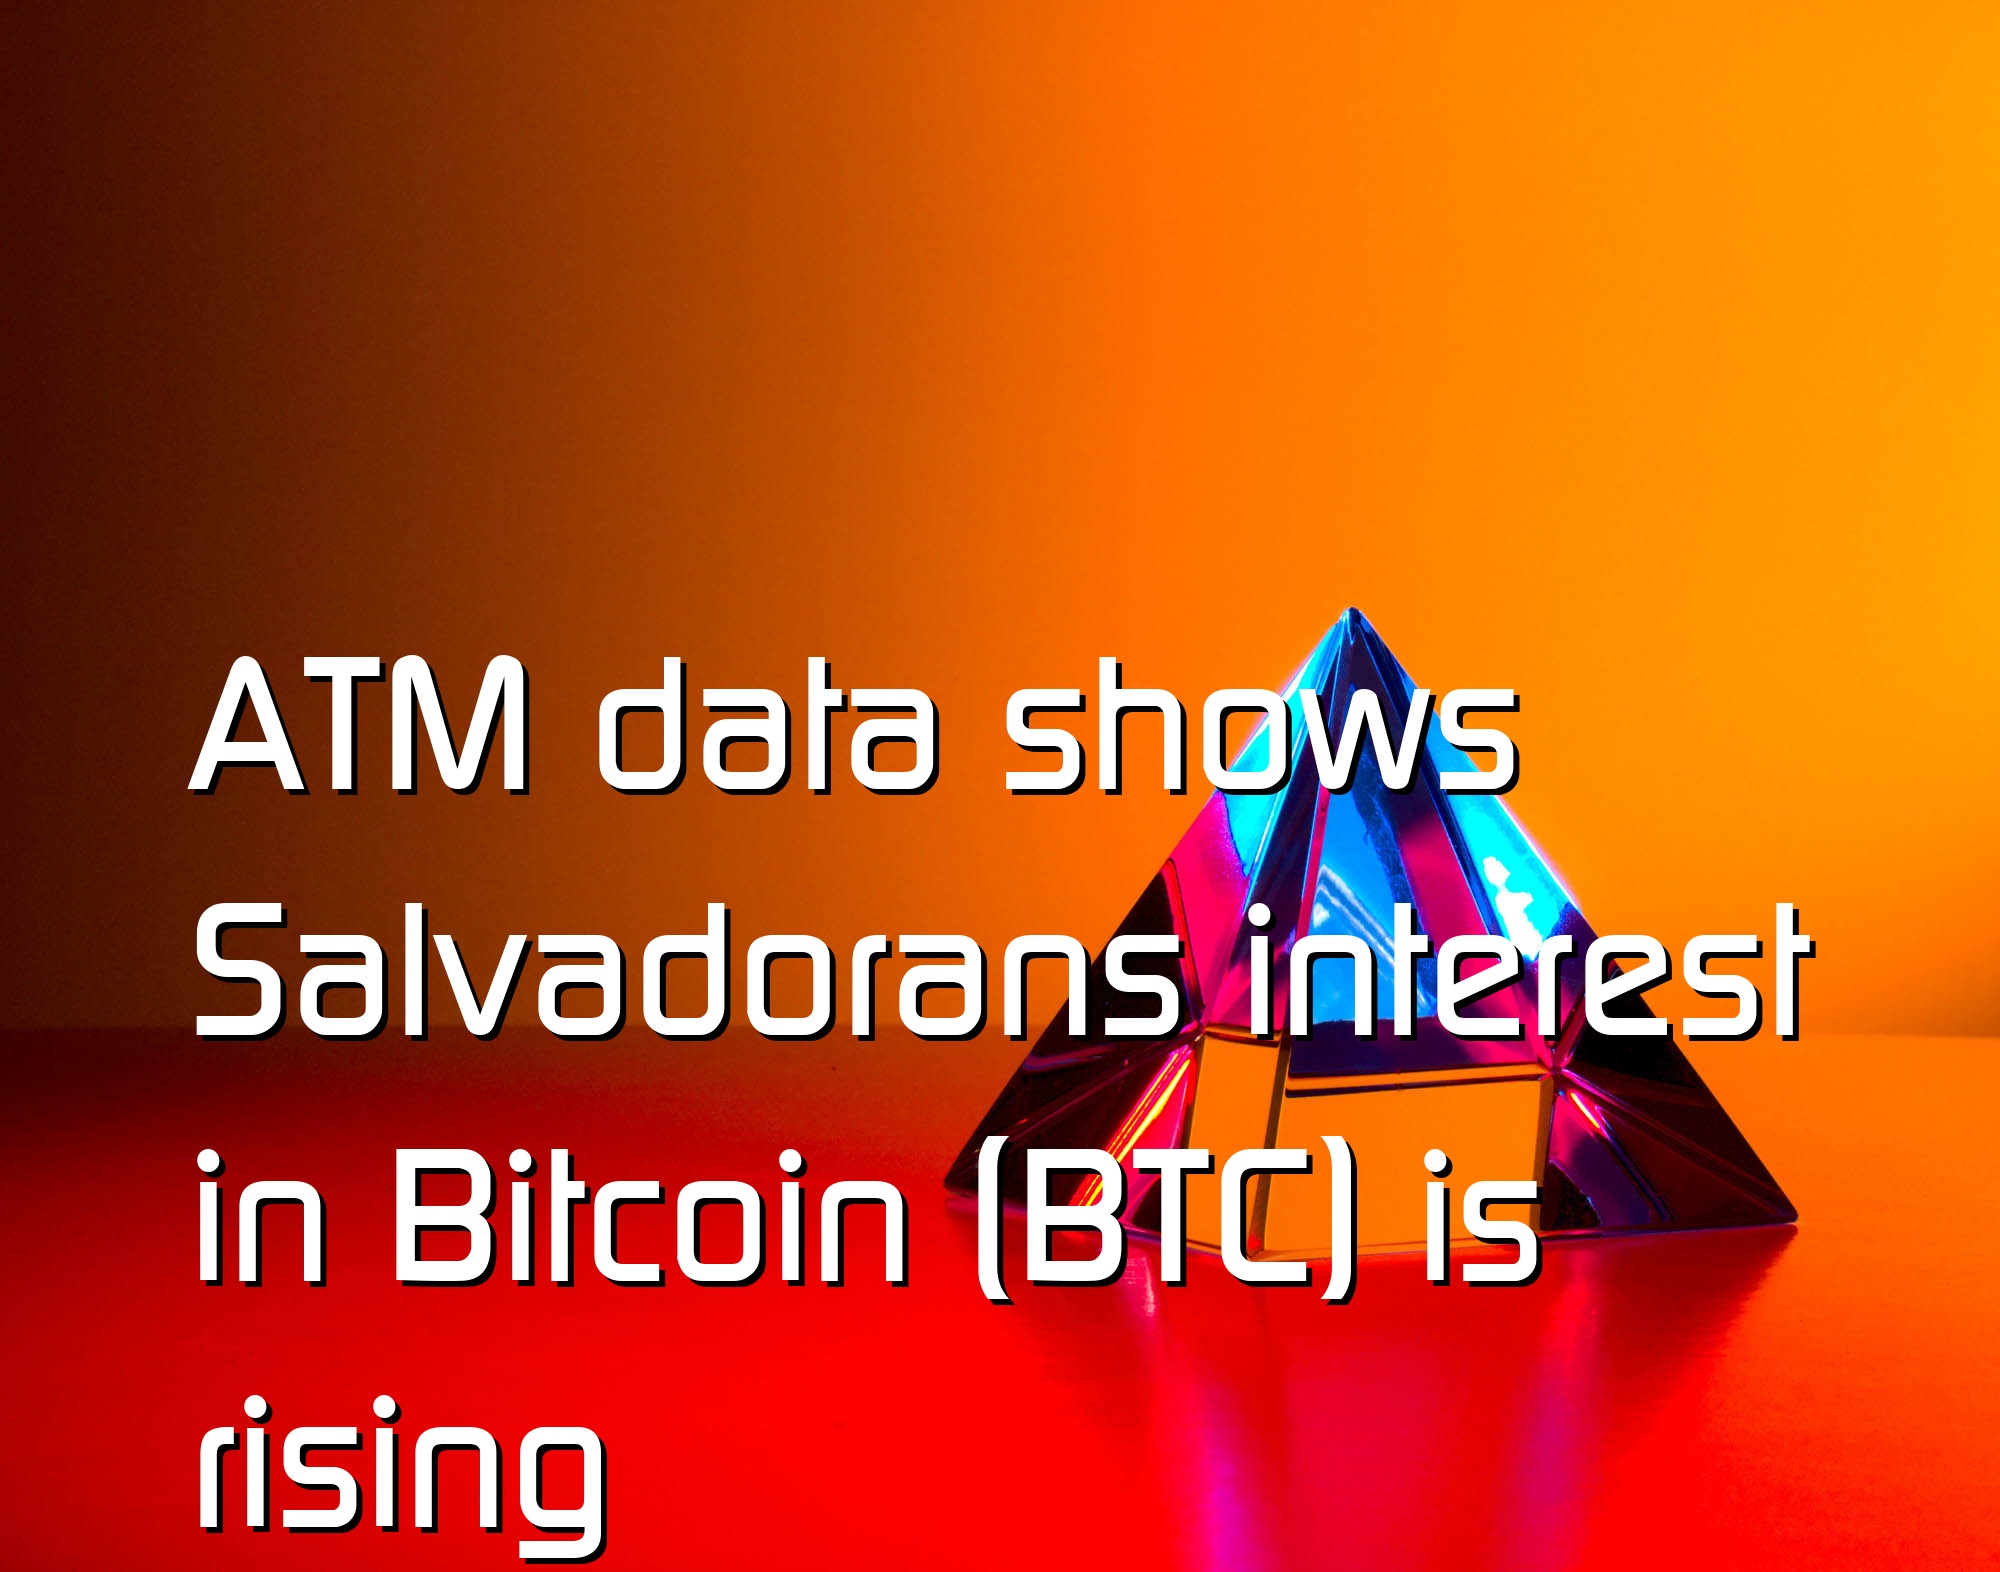 @$61,426.4: ATM data shows Salvadorans interest in Bitcoin (BTC) is rising